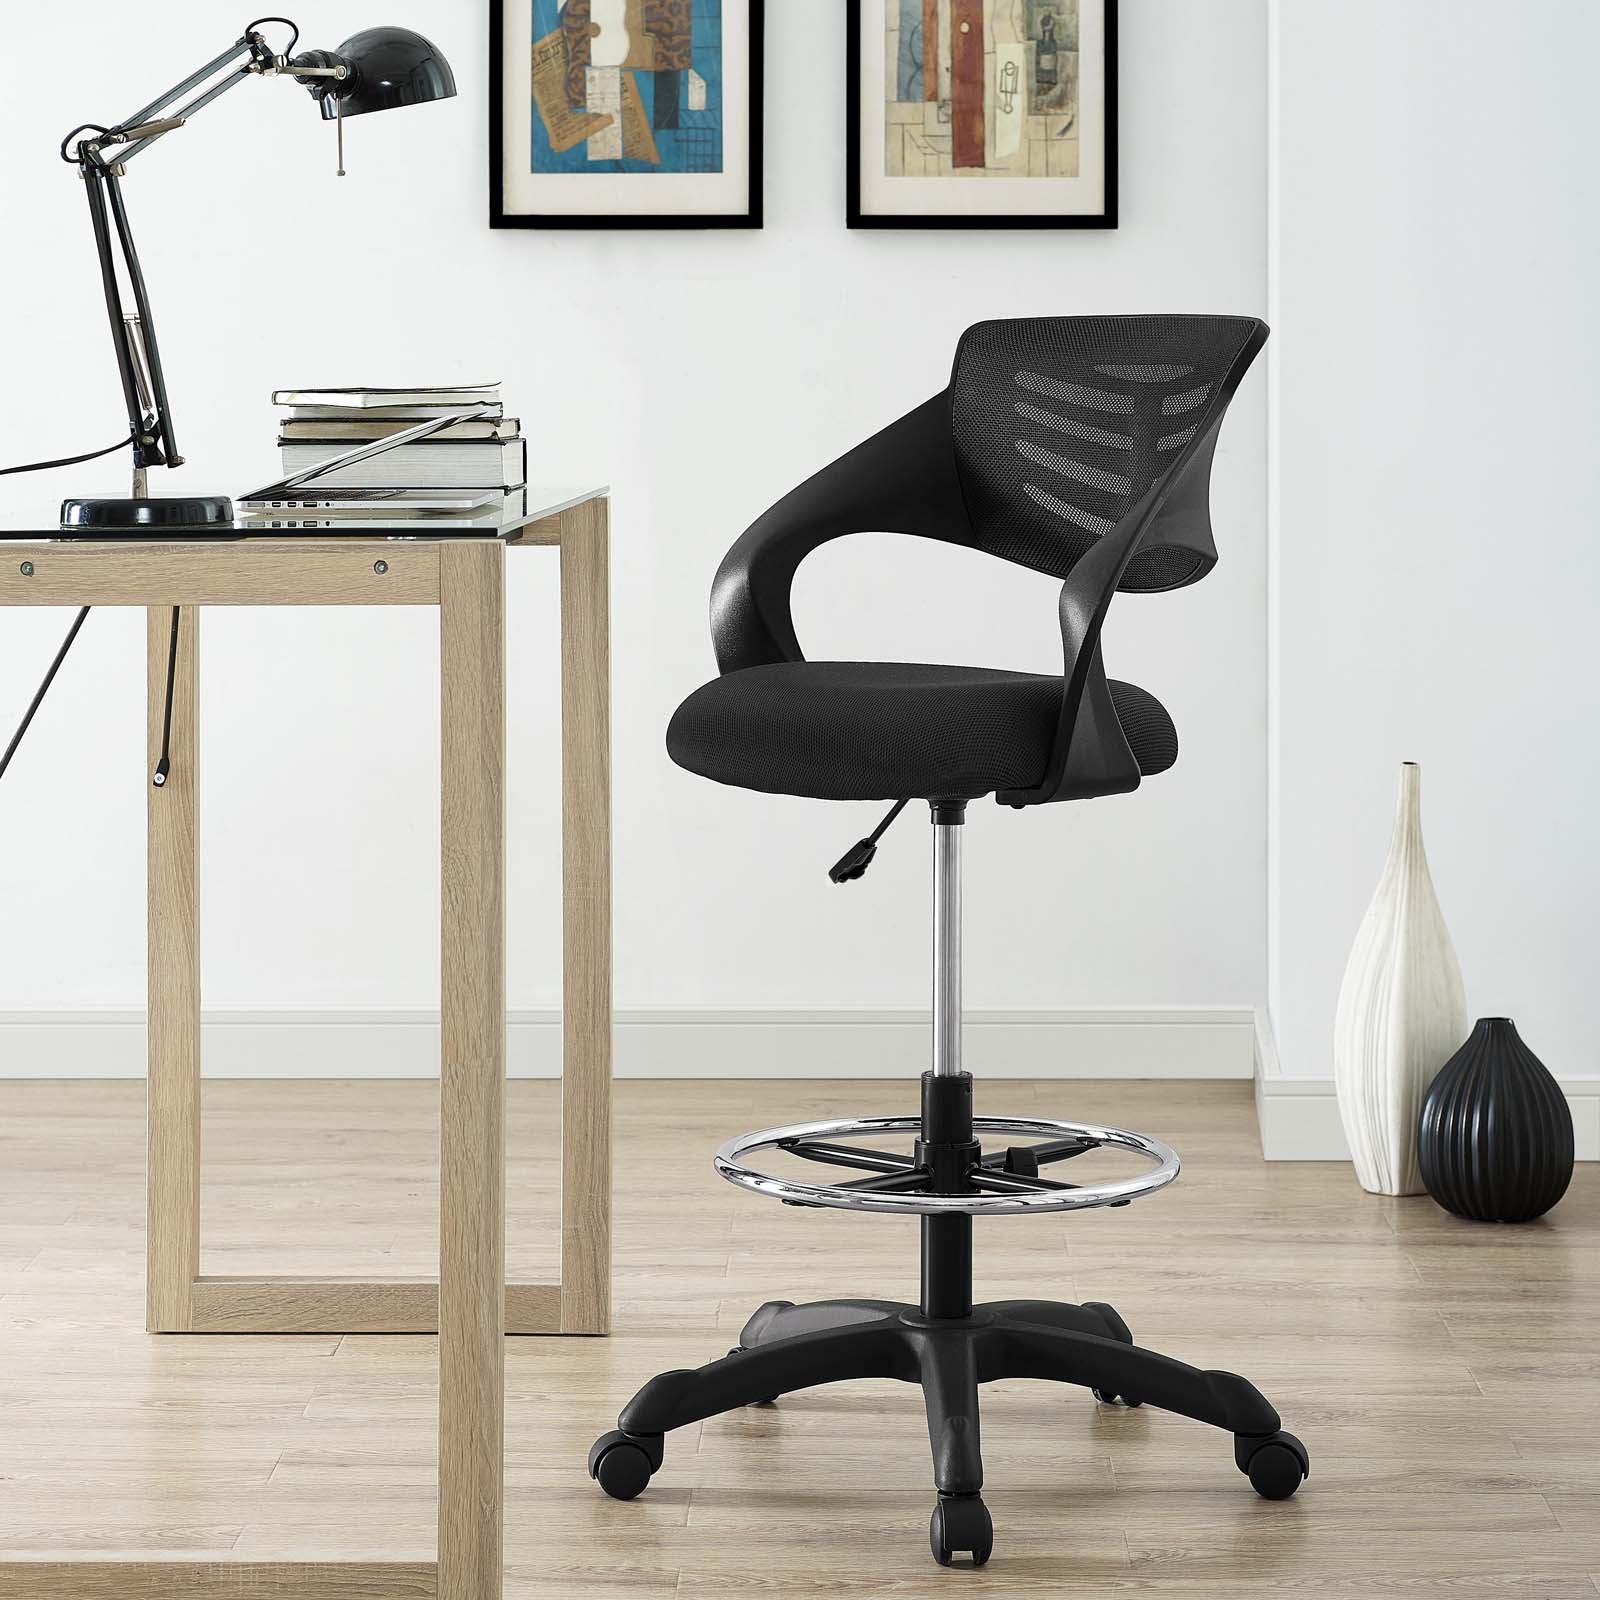 Modway Task Chairs - Thrive Mesh Drafting Chair Black